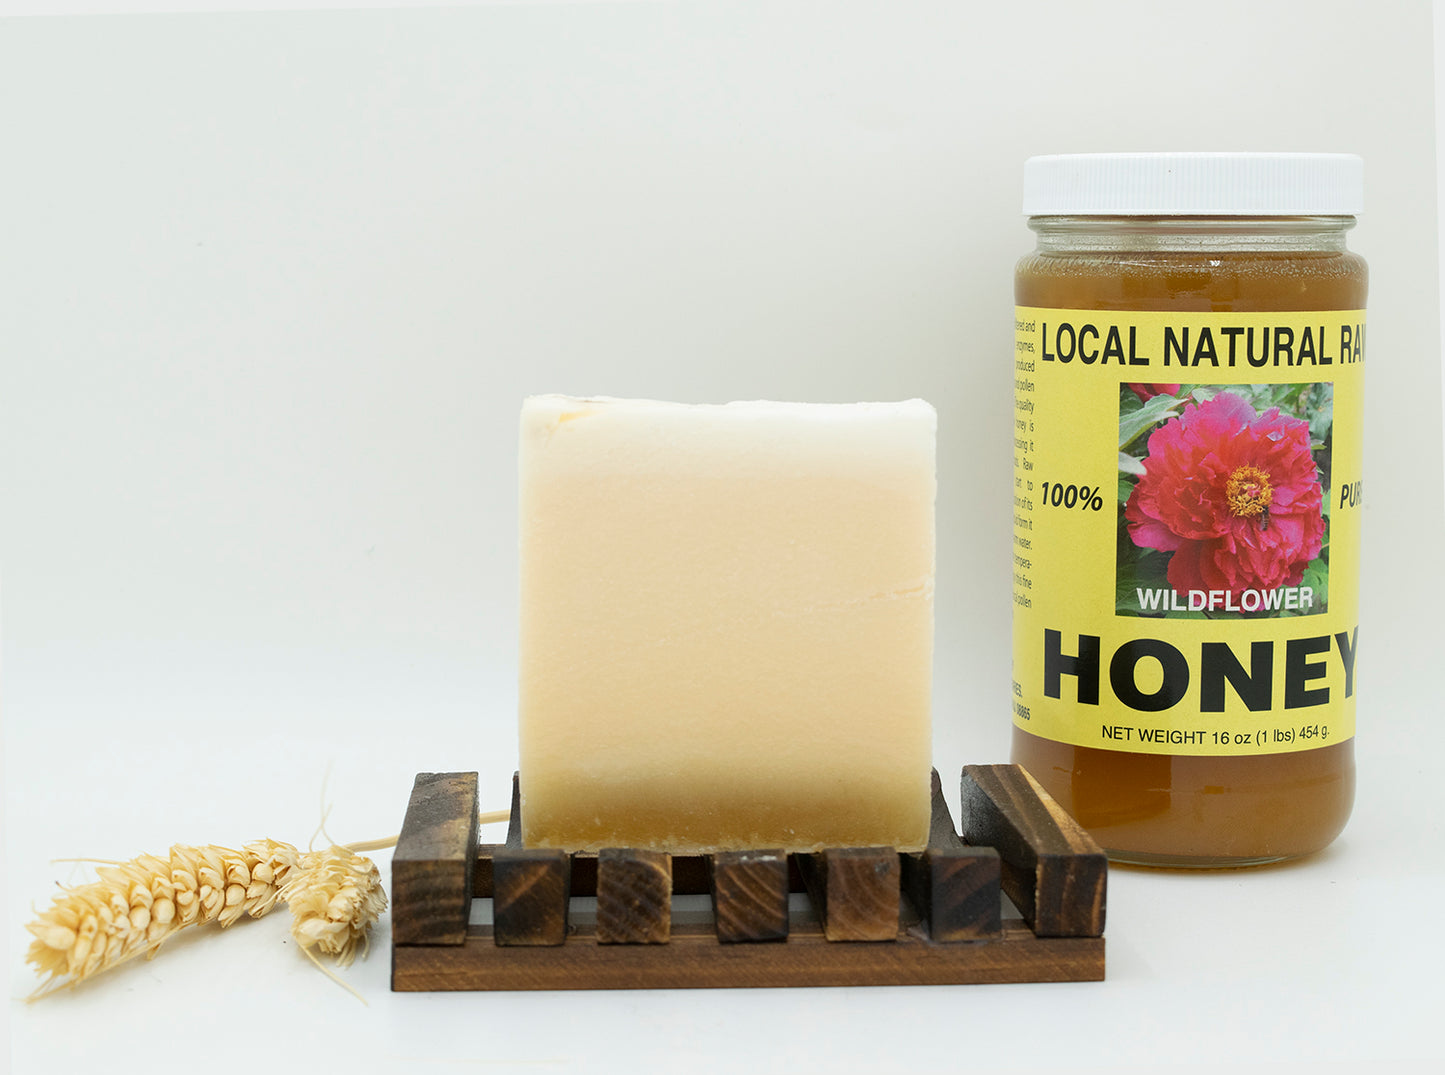 Oatmeal And Honey Natural Crafted Bar Soap 4.5oz - Kay Pedals